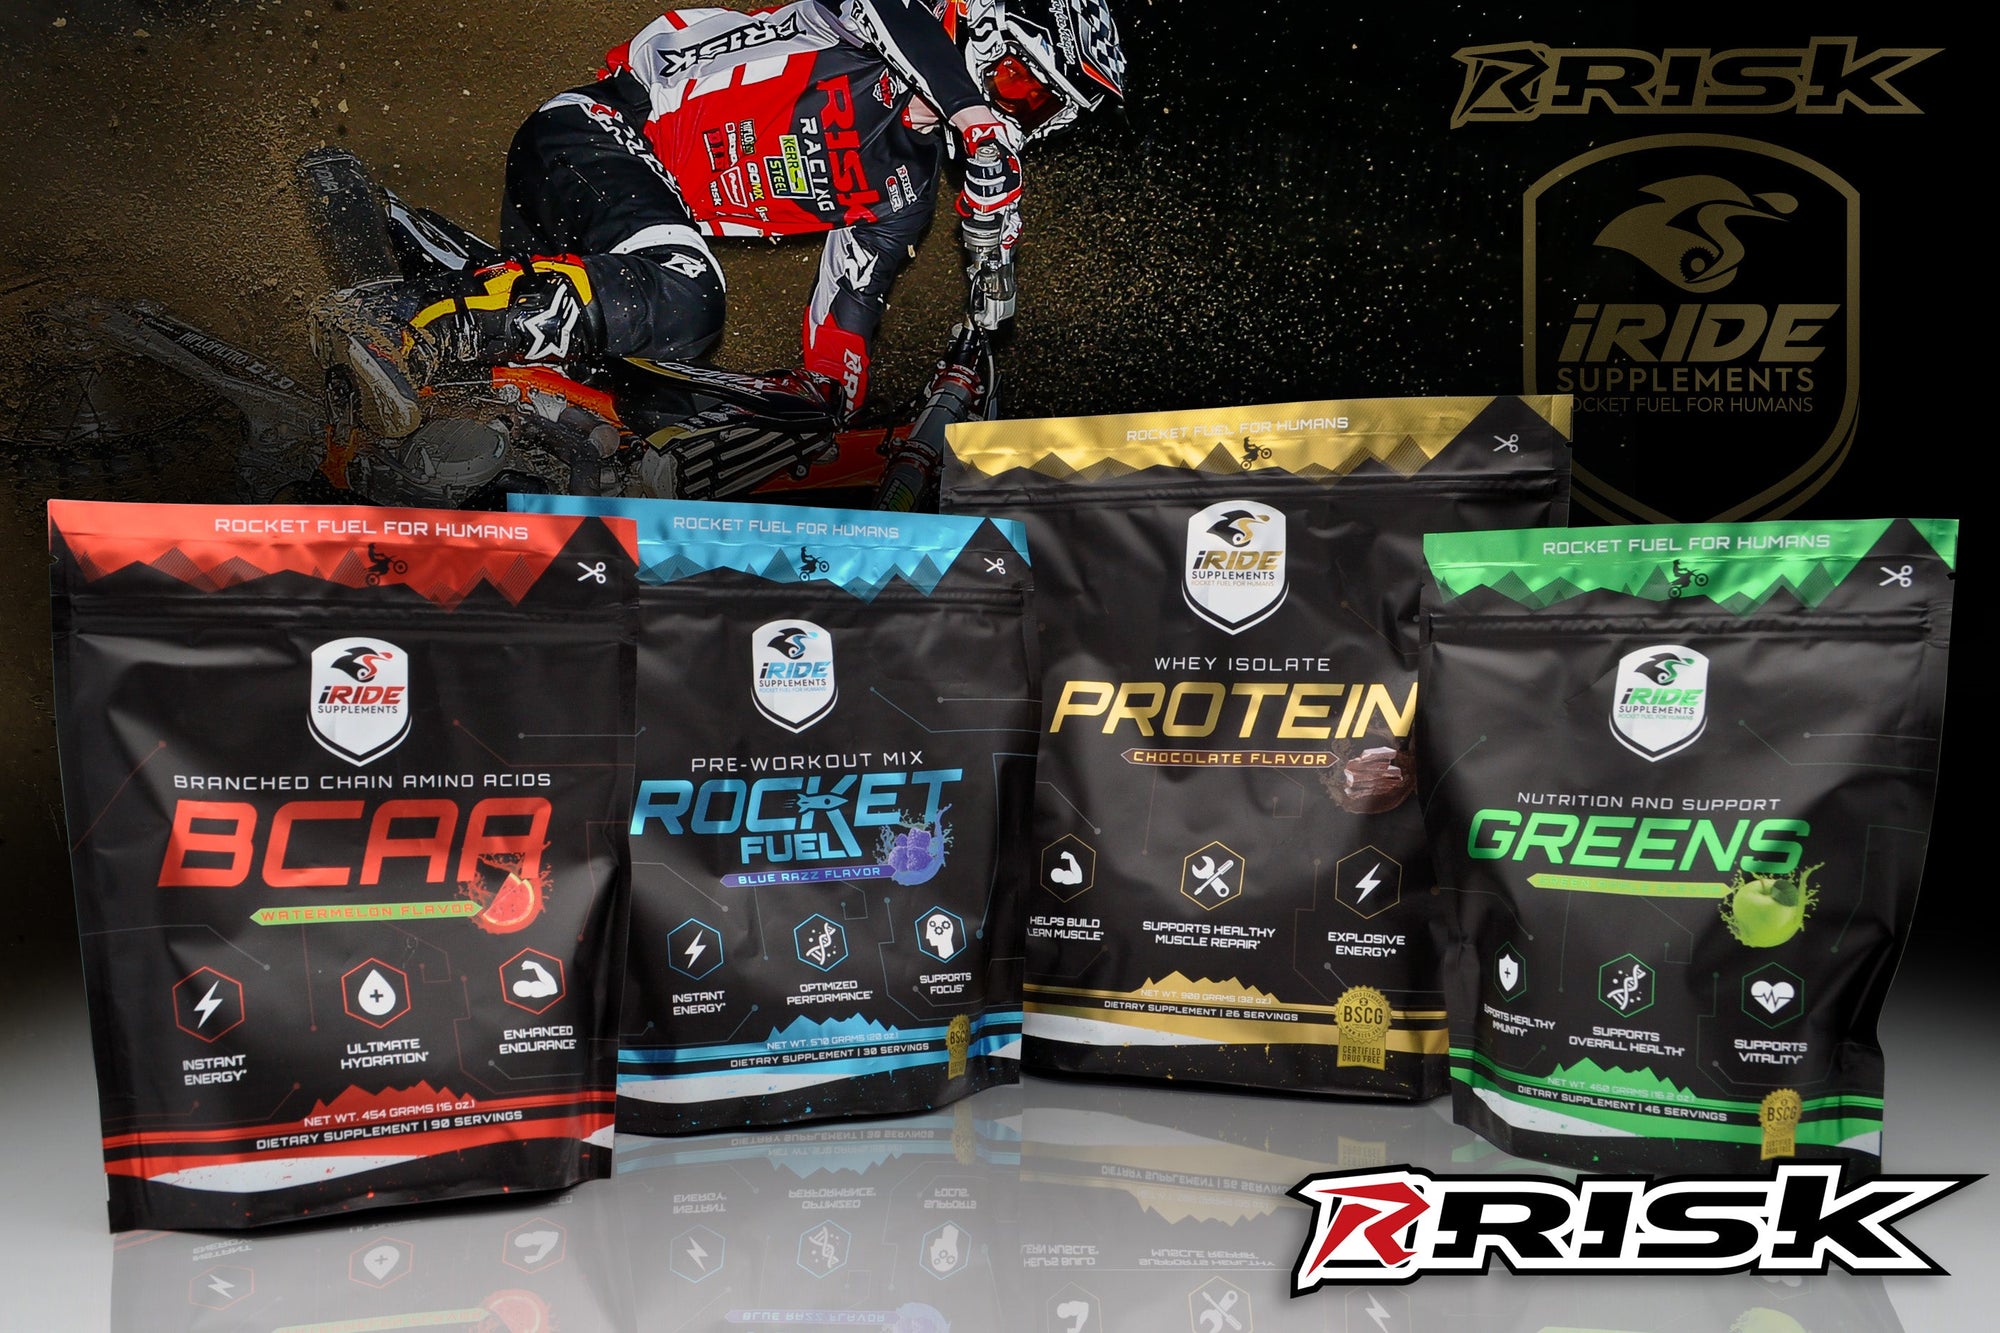 RISK Racing iRide Supplements BCAA's, Rocket Fuel, Protein, and greens laid out next to each other with a motocross rider wearing risk racing red and black motocross gear in the background.